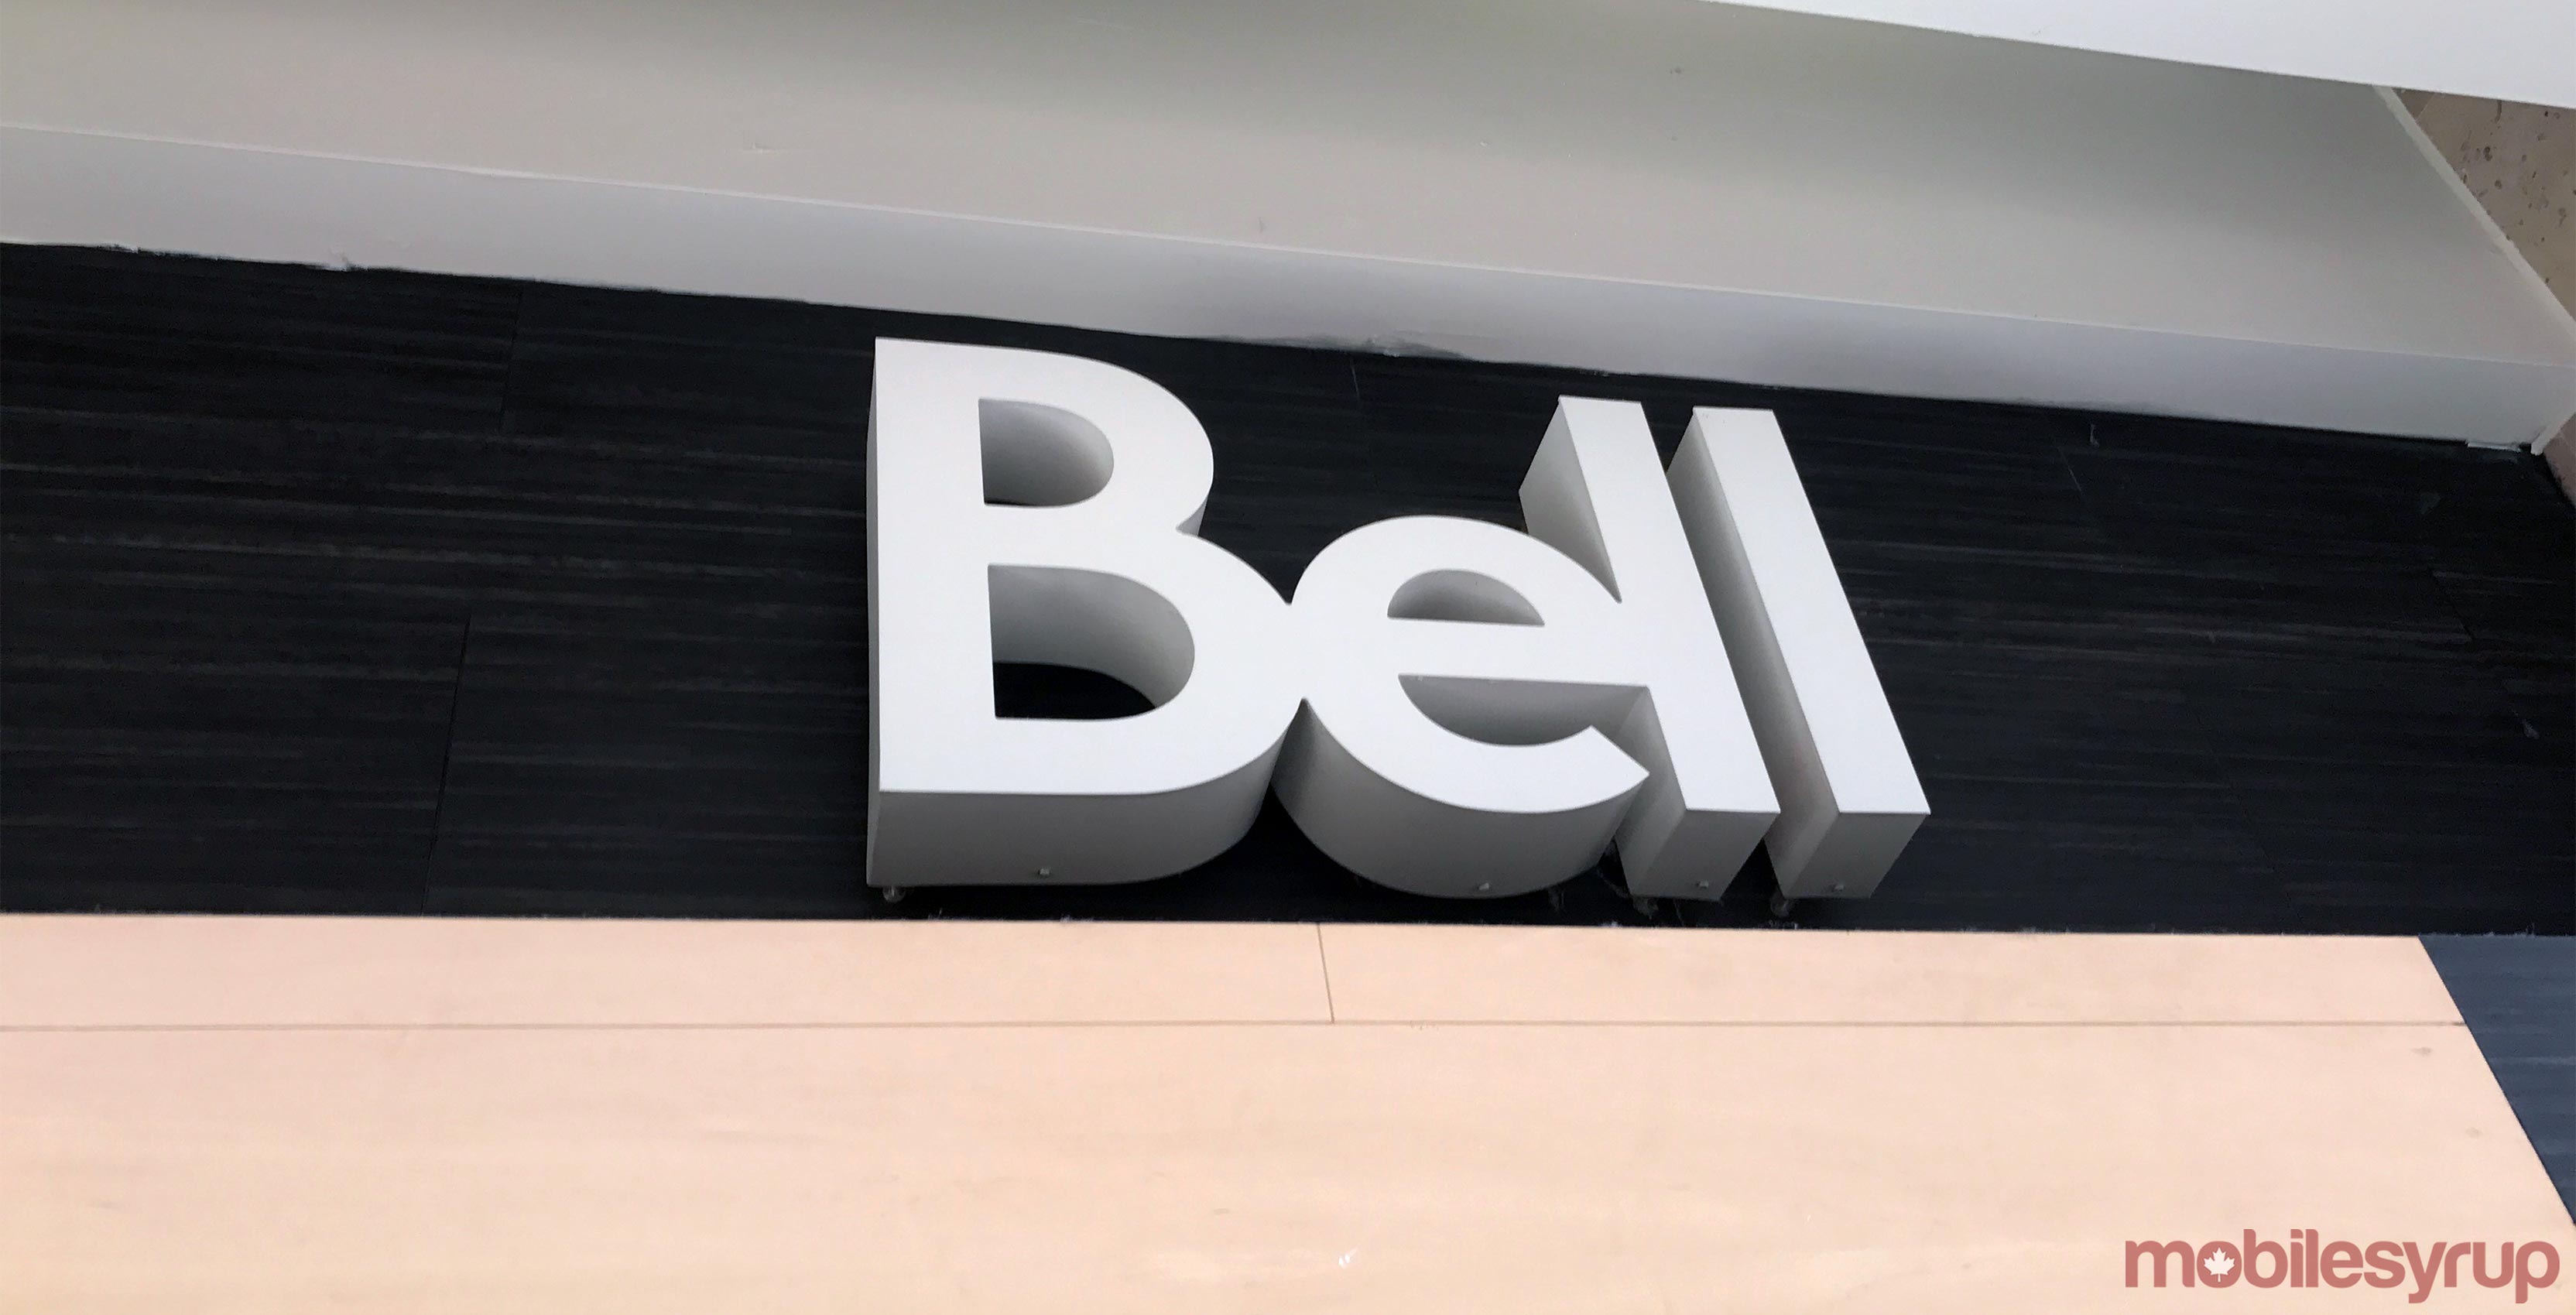 Bell store sign